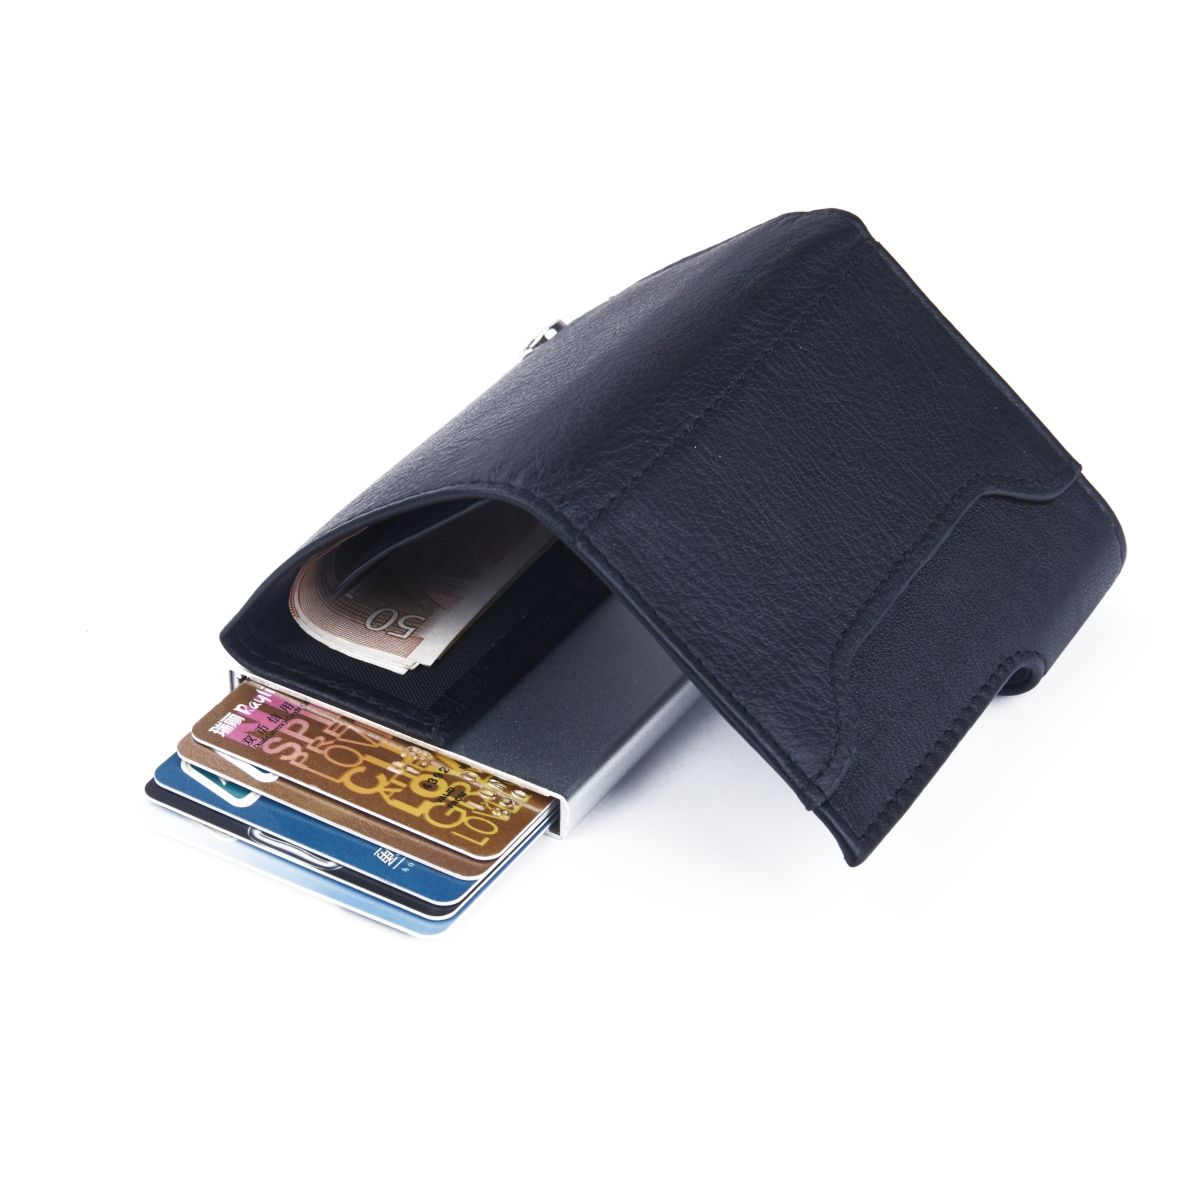 C-Secure Aluminum Card Holder with PU Leather - Black